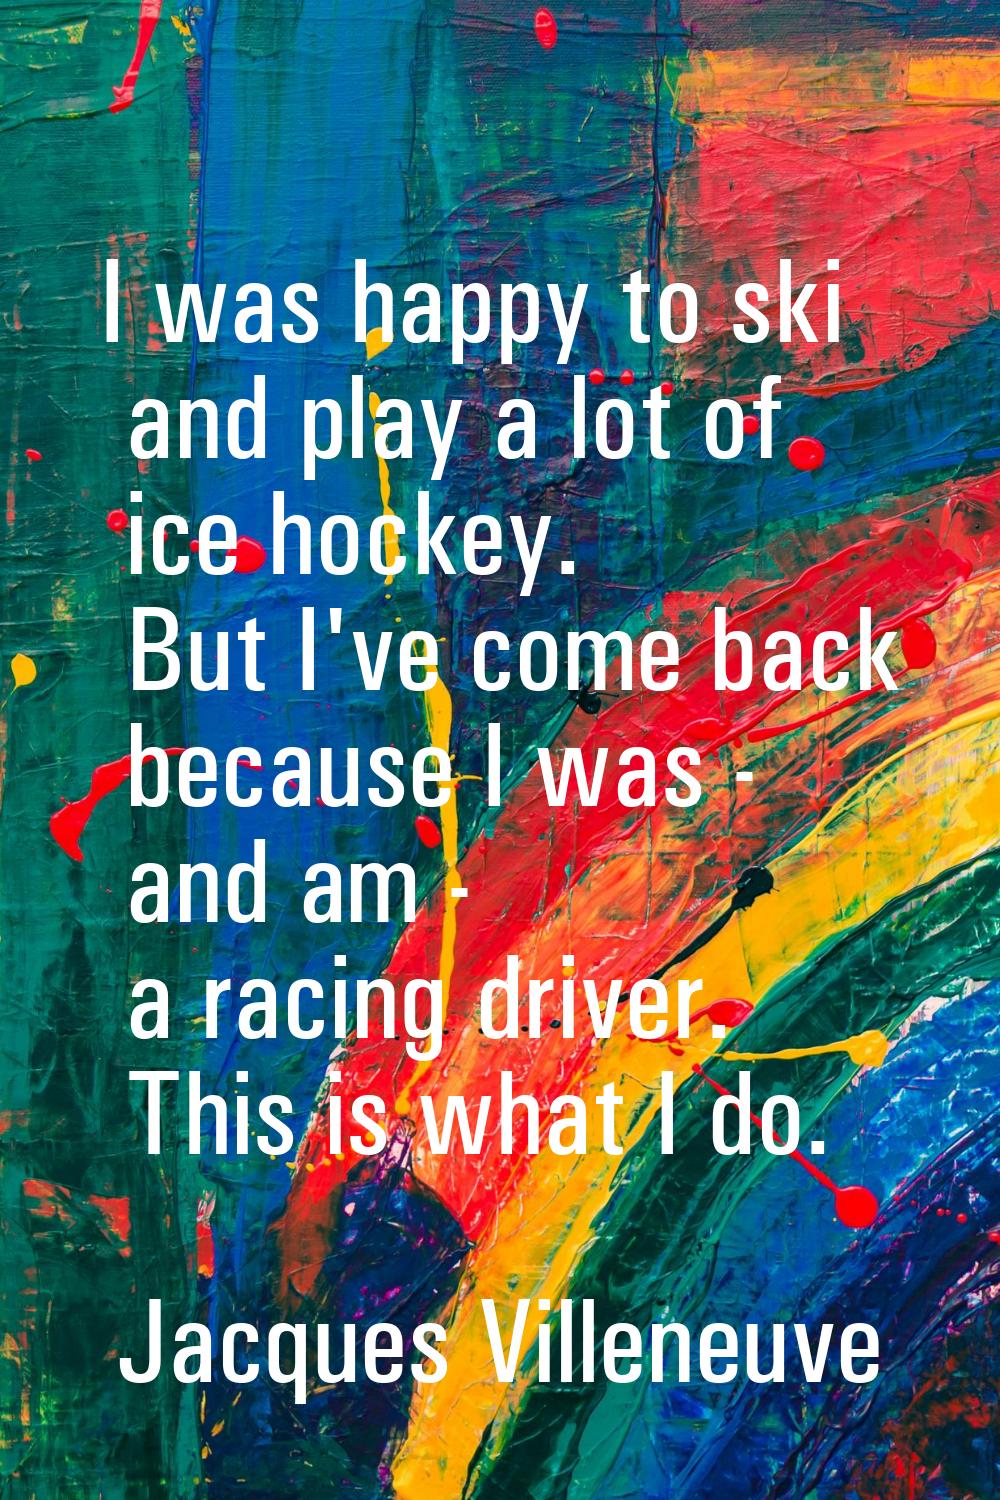 I was happy to ski and play a lot of ice hockey. But I've come back because I was - and am - a raci